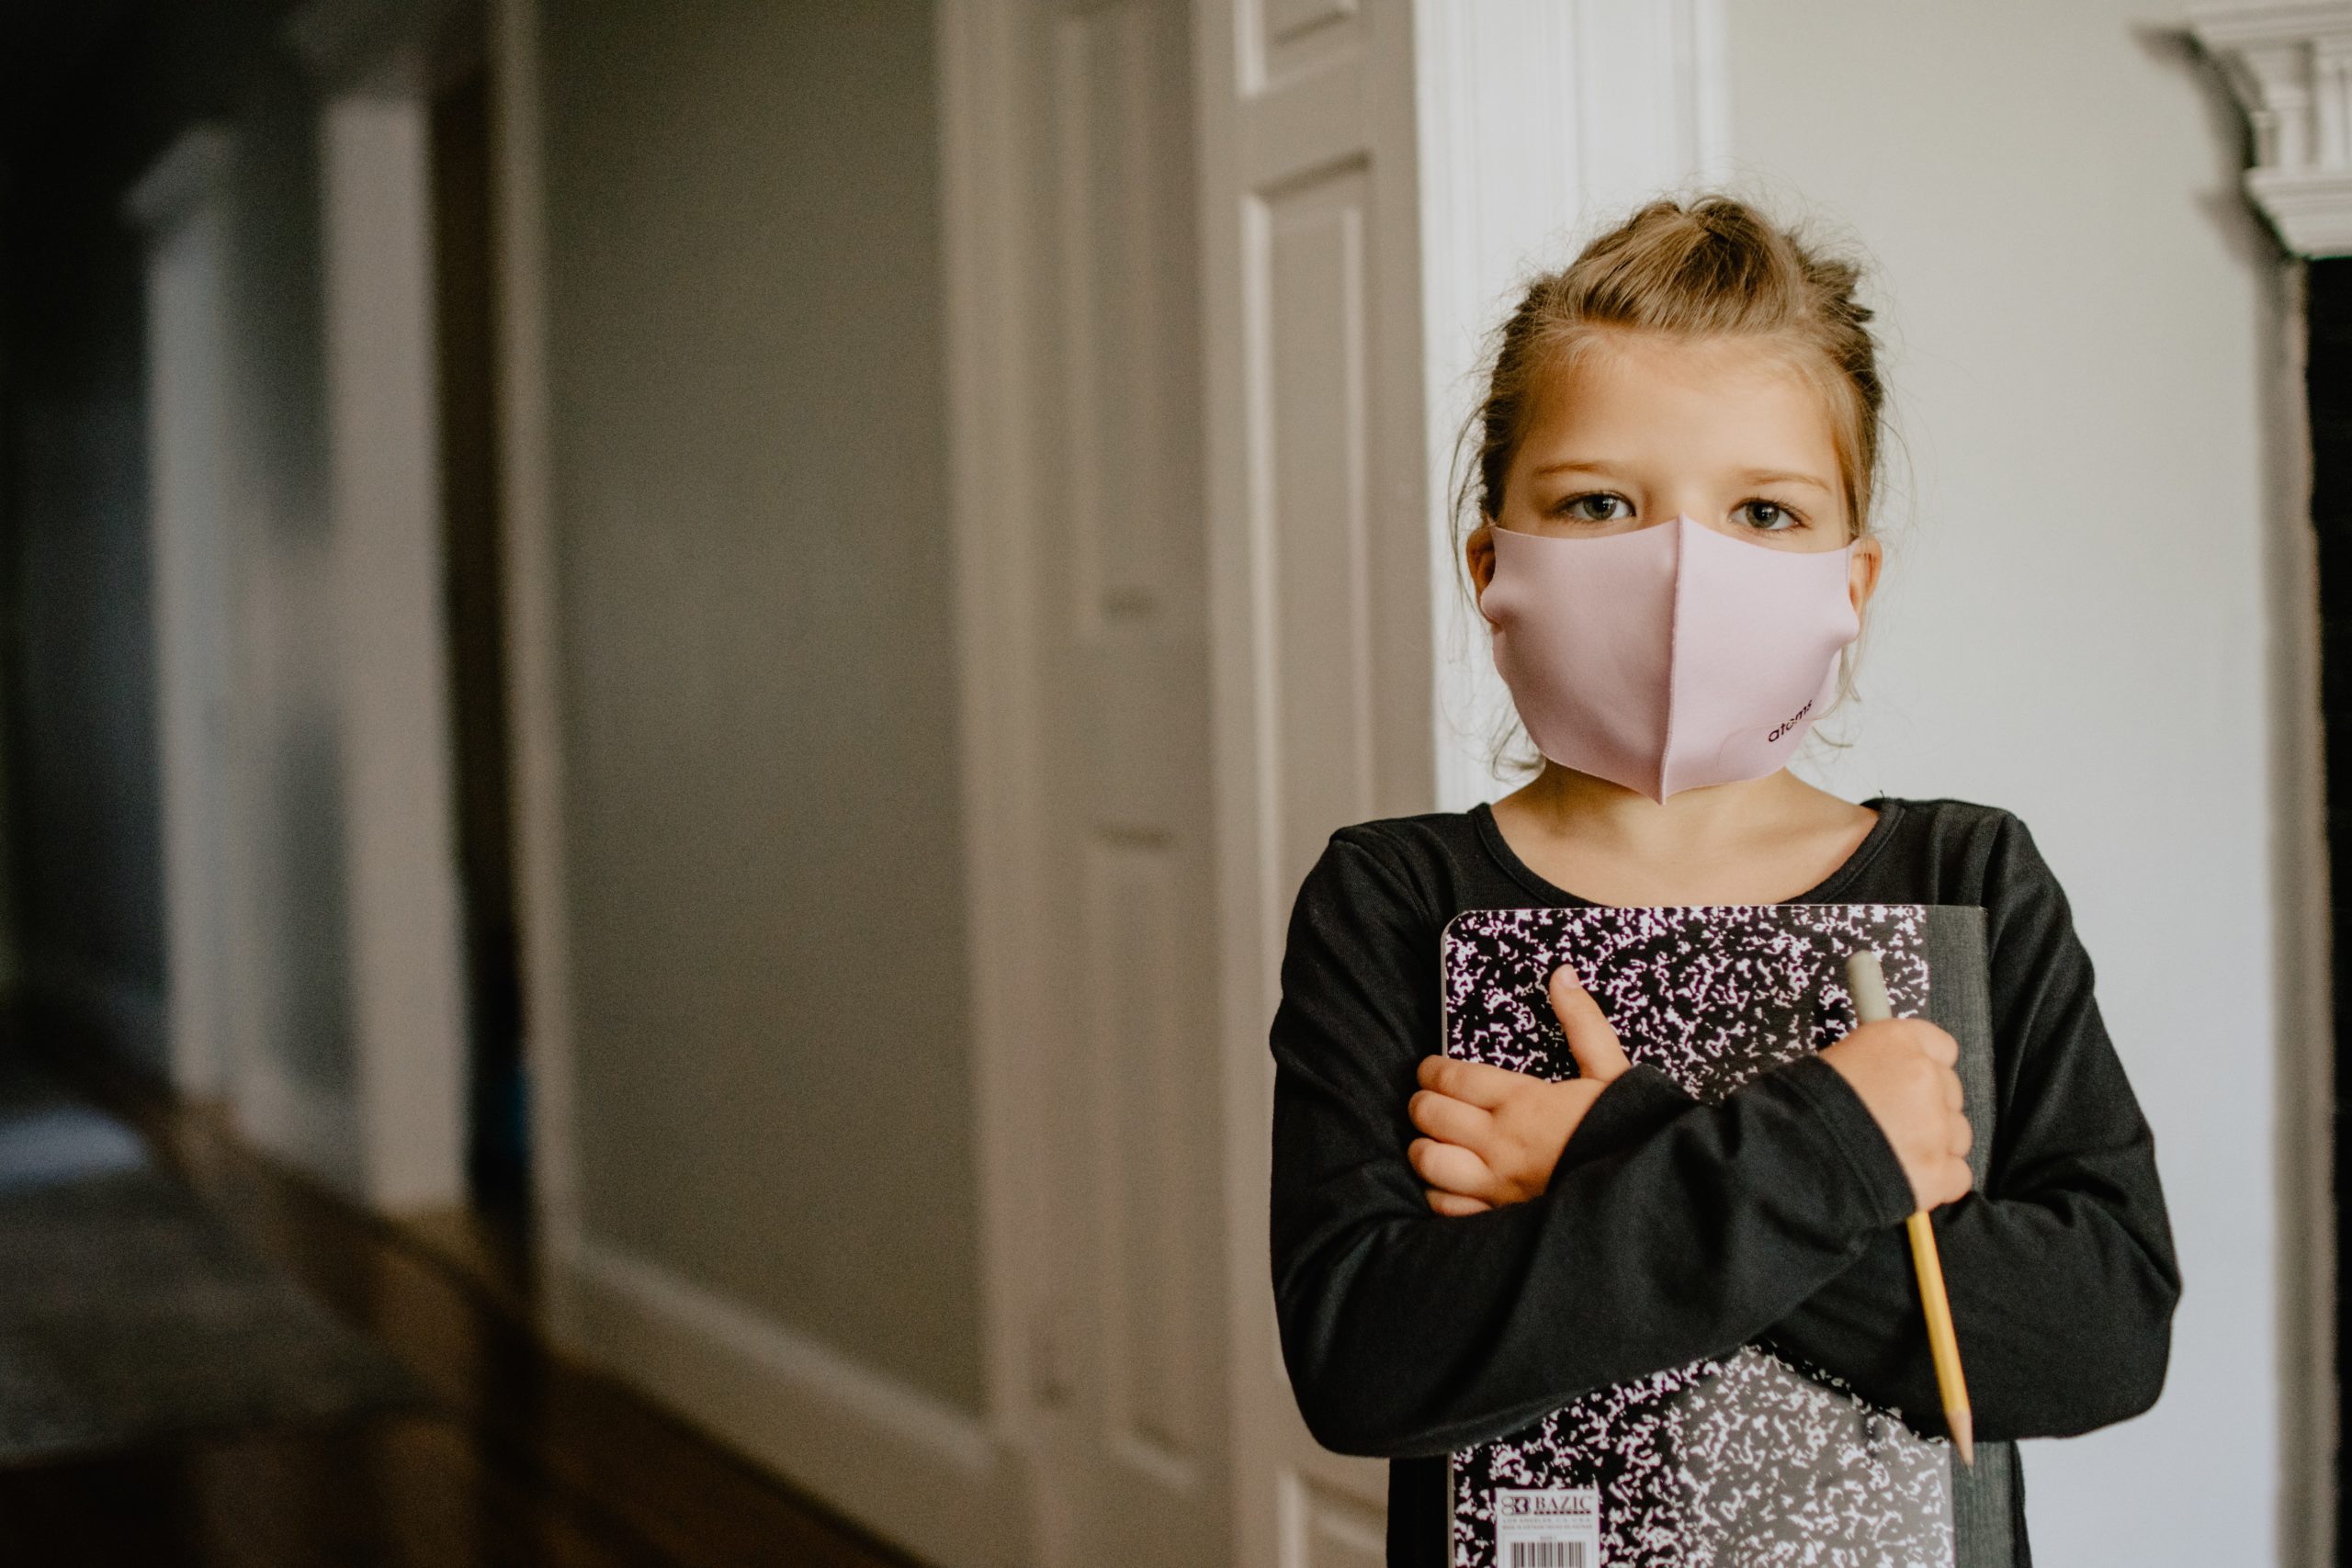 McKee is being SUED for forcible masking children in school. The state has still refused to present any data showing that it was necessary – And — that the court FOUND ‘irreparable harm’ occurred.